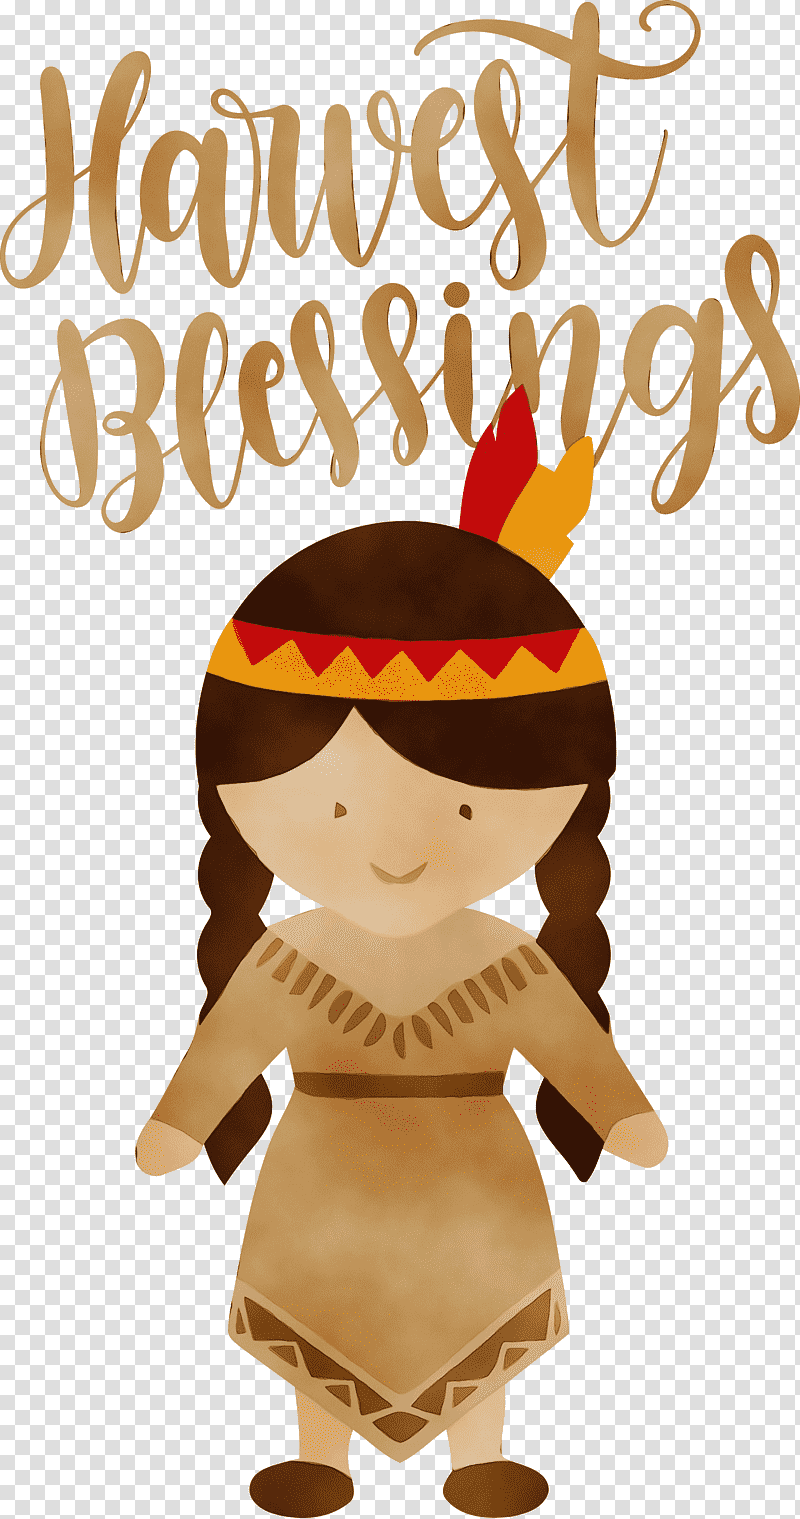 indigenous peoples american indian group americas indian americans gondi people, Harvest Blessings, Thanksgiving, Autumn, Watercolor, Paint, Wet Ink transparent background PNG clipart